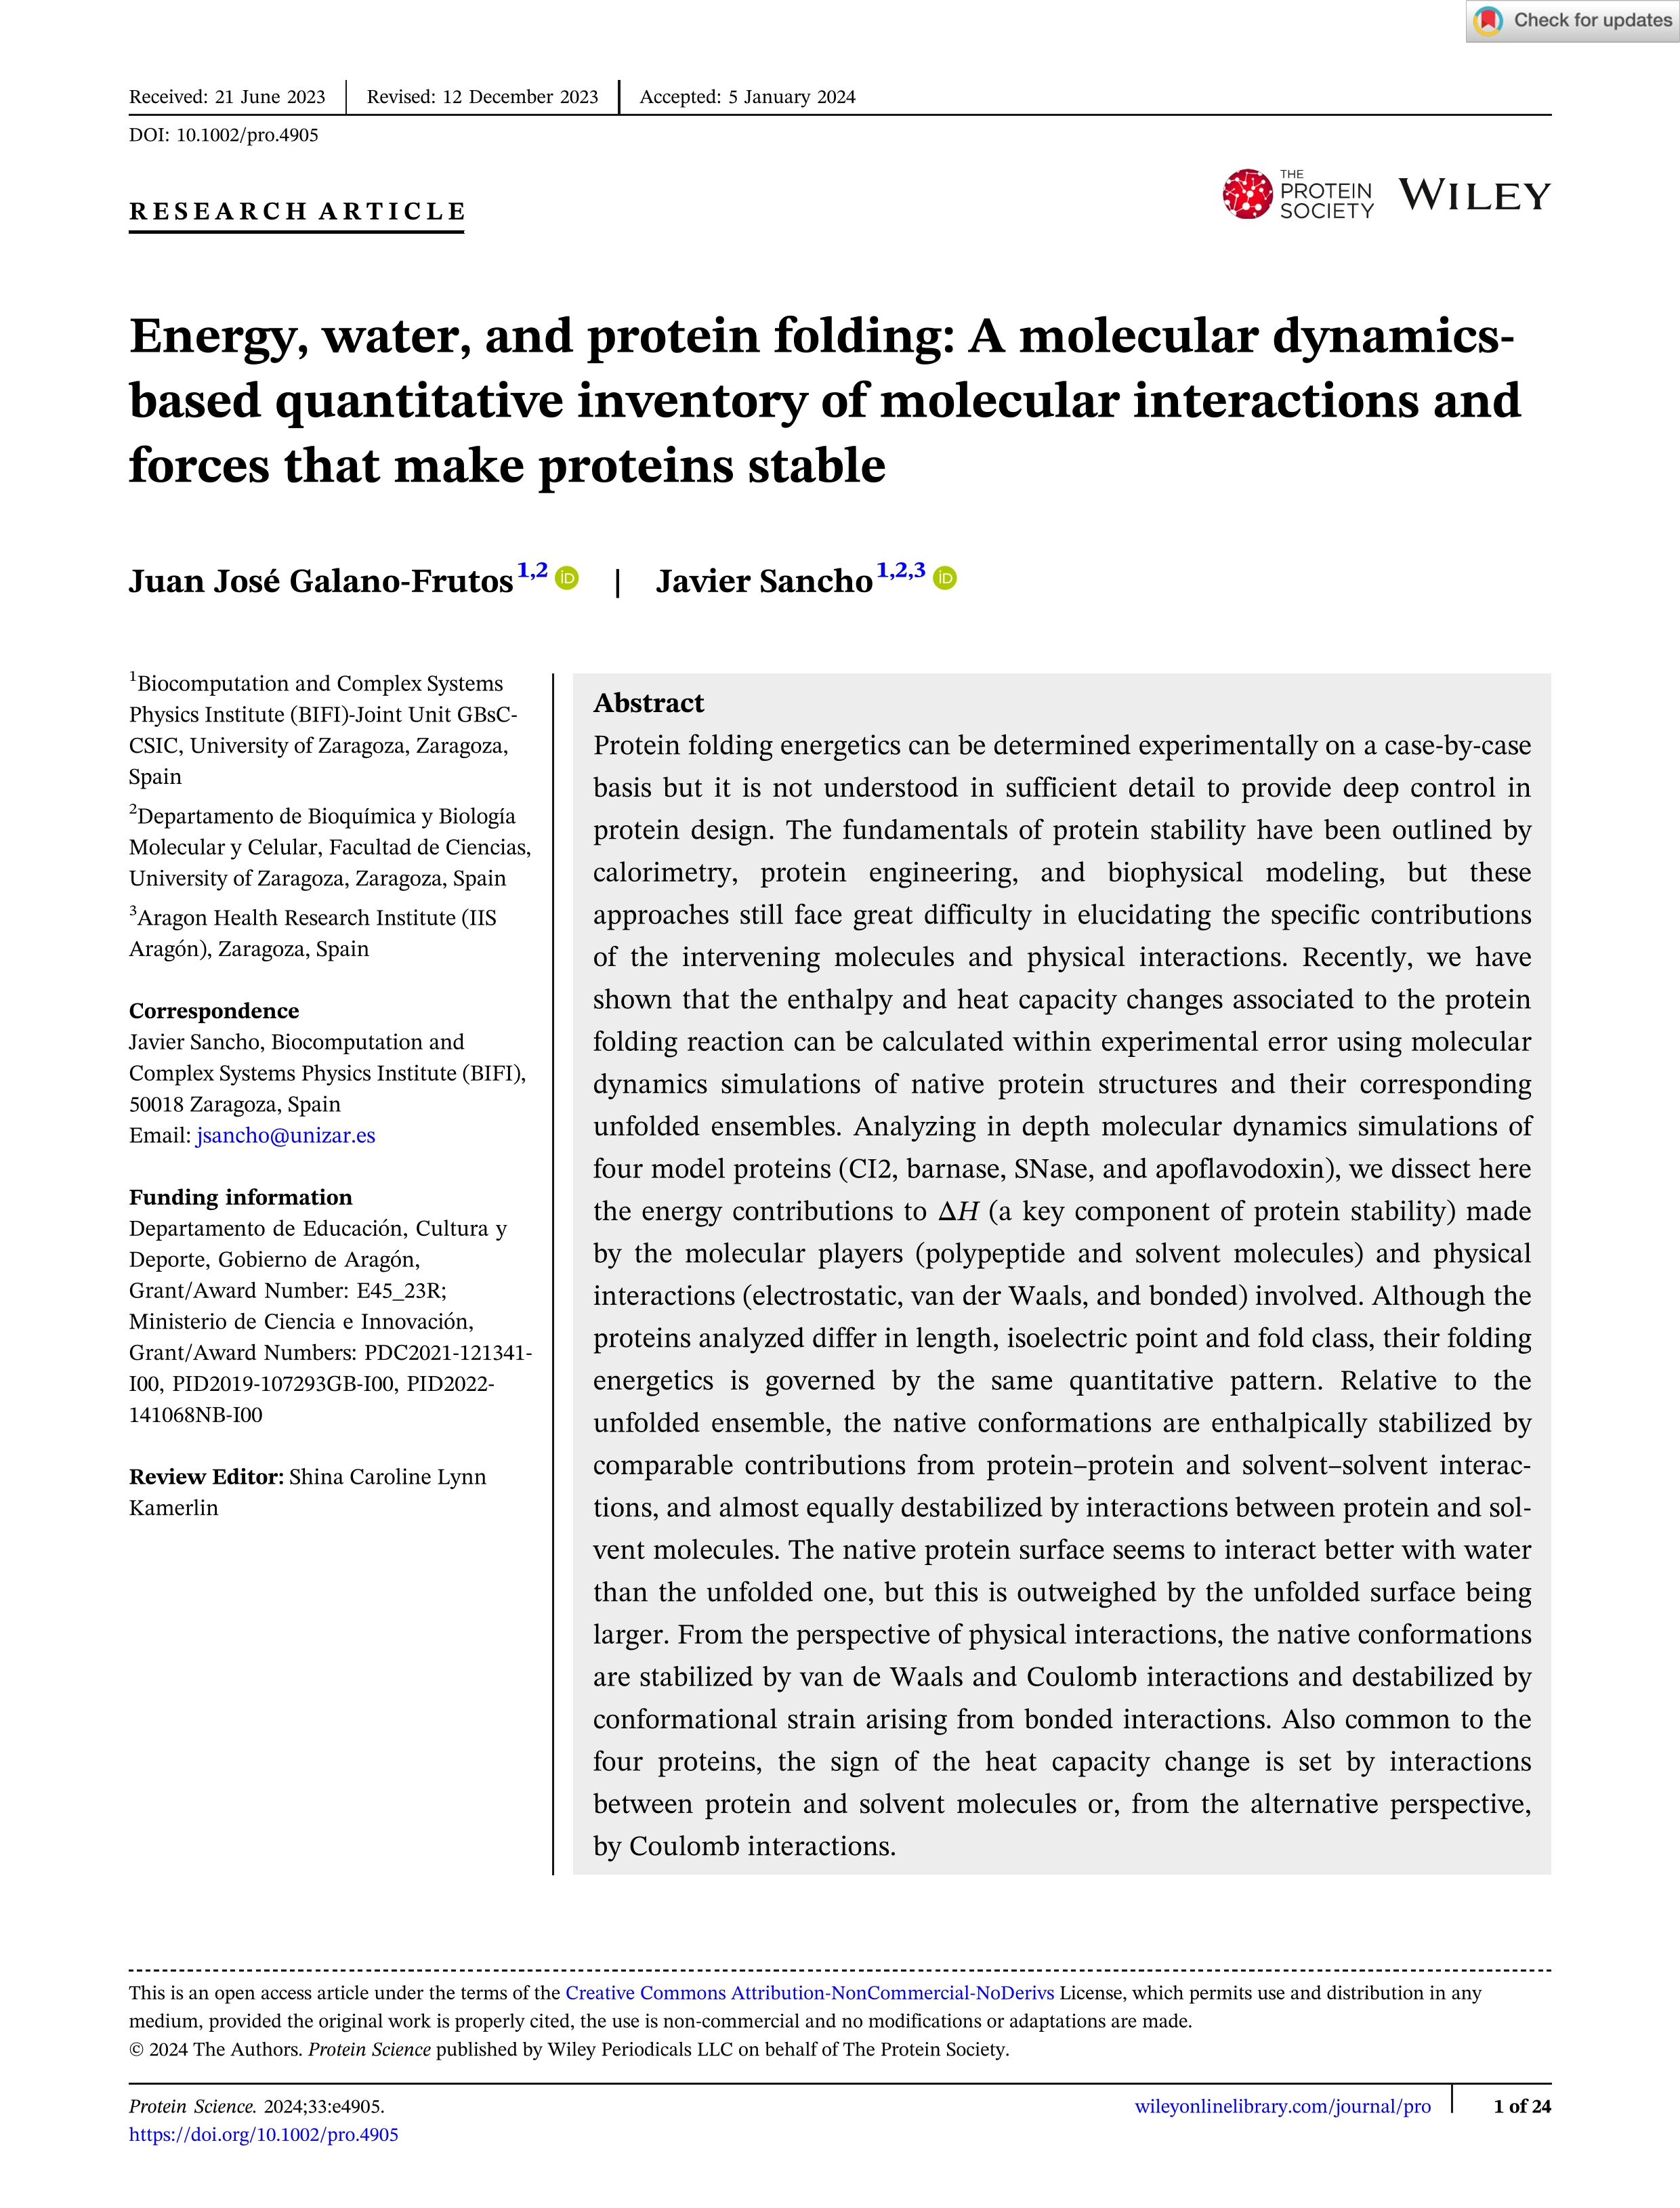 Energy, water, and protein folding: A molecular dynamics-based quantitative inventory of molecular interactions and forces that make proteins stable